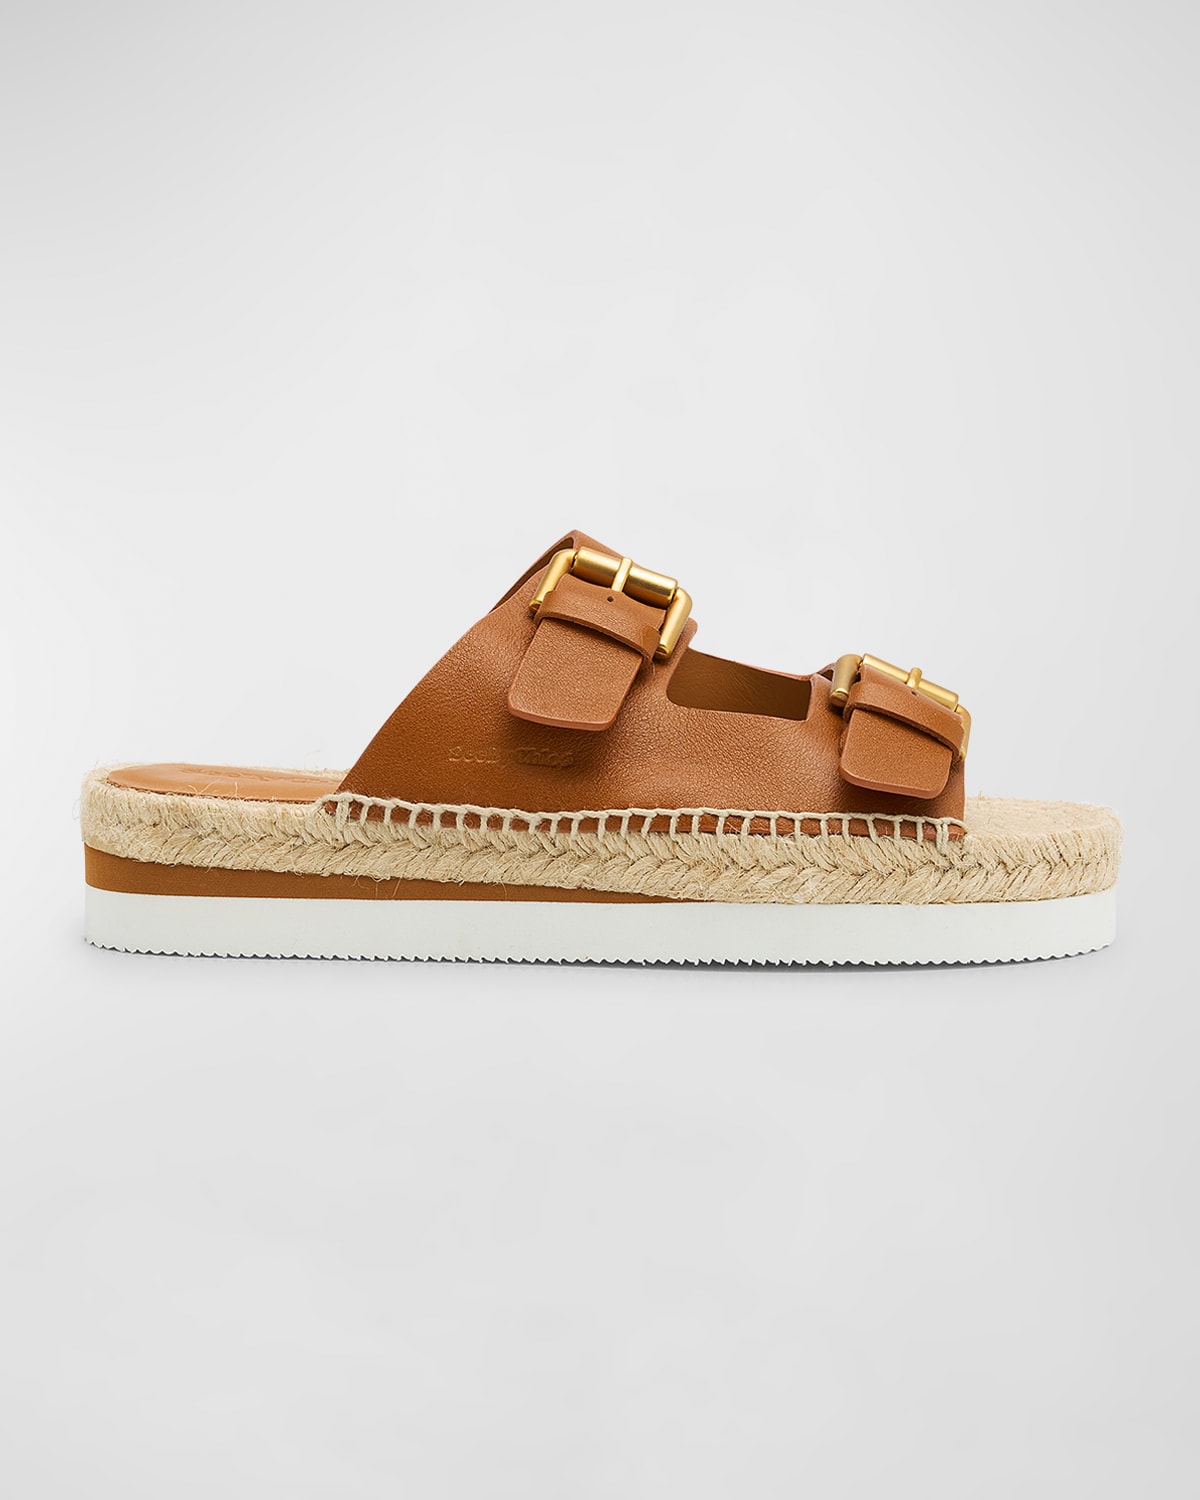 SEE BY CHLOÉ GLYN DUAL-BUCKLE ESPADRILLE SANDALS